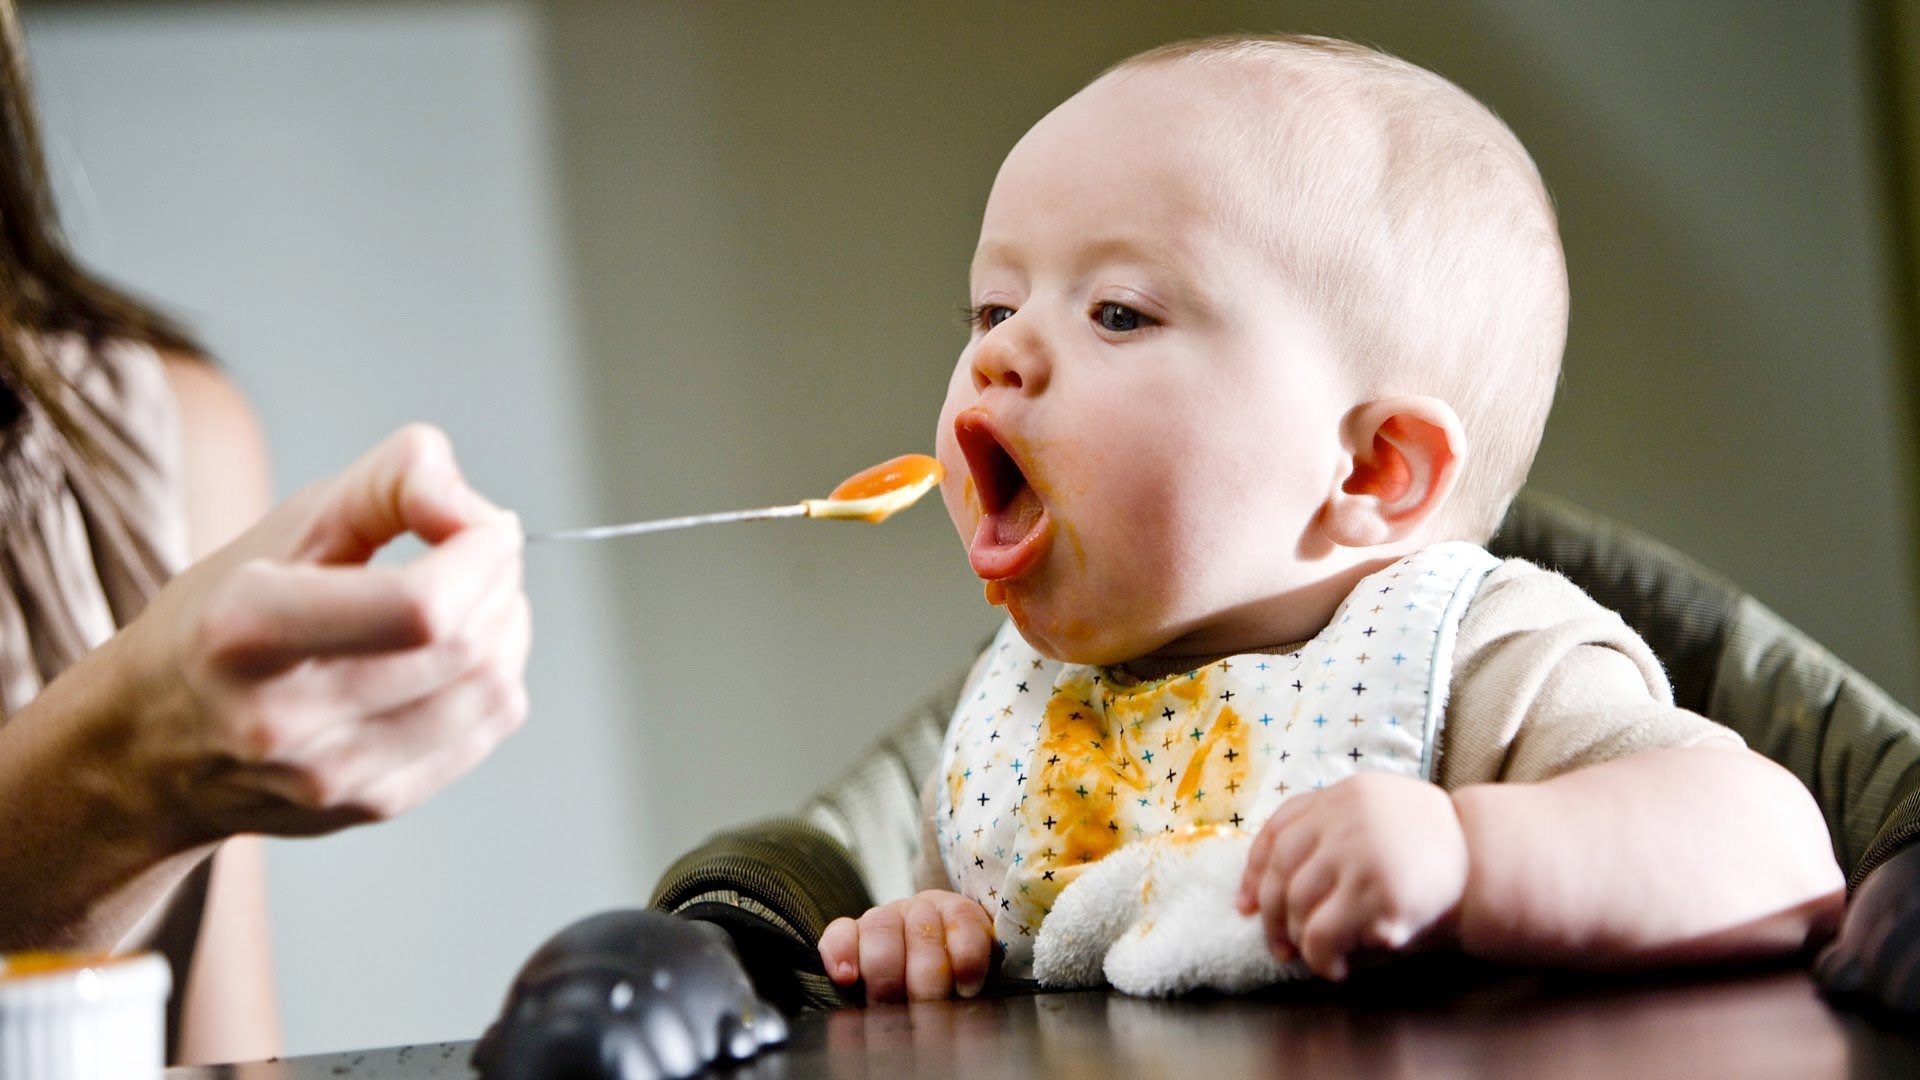 Infant nutrition to see 7% CAGR